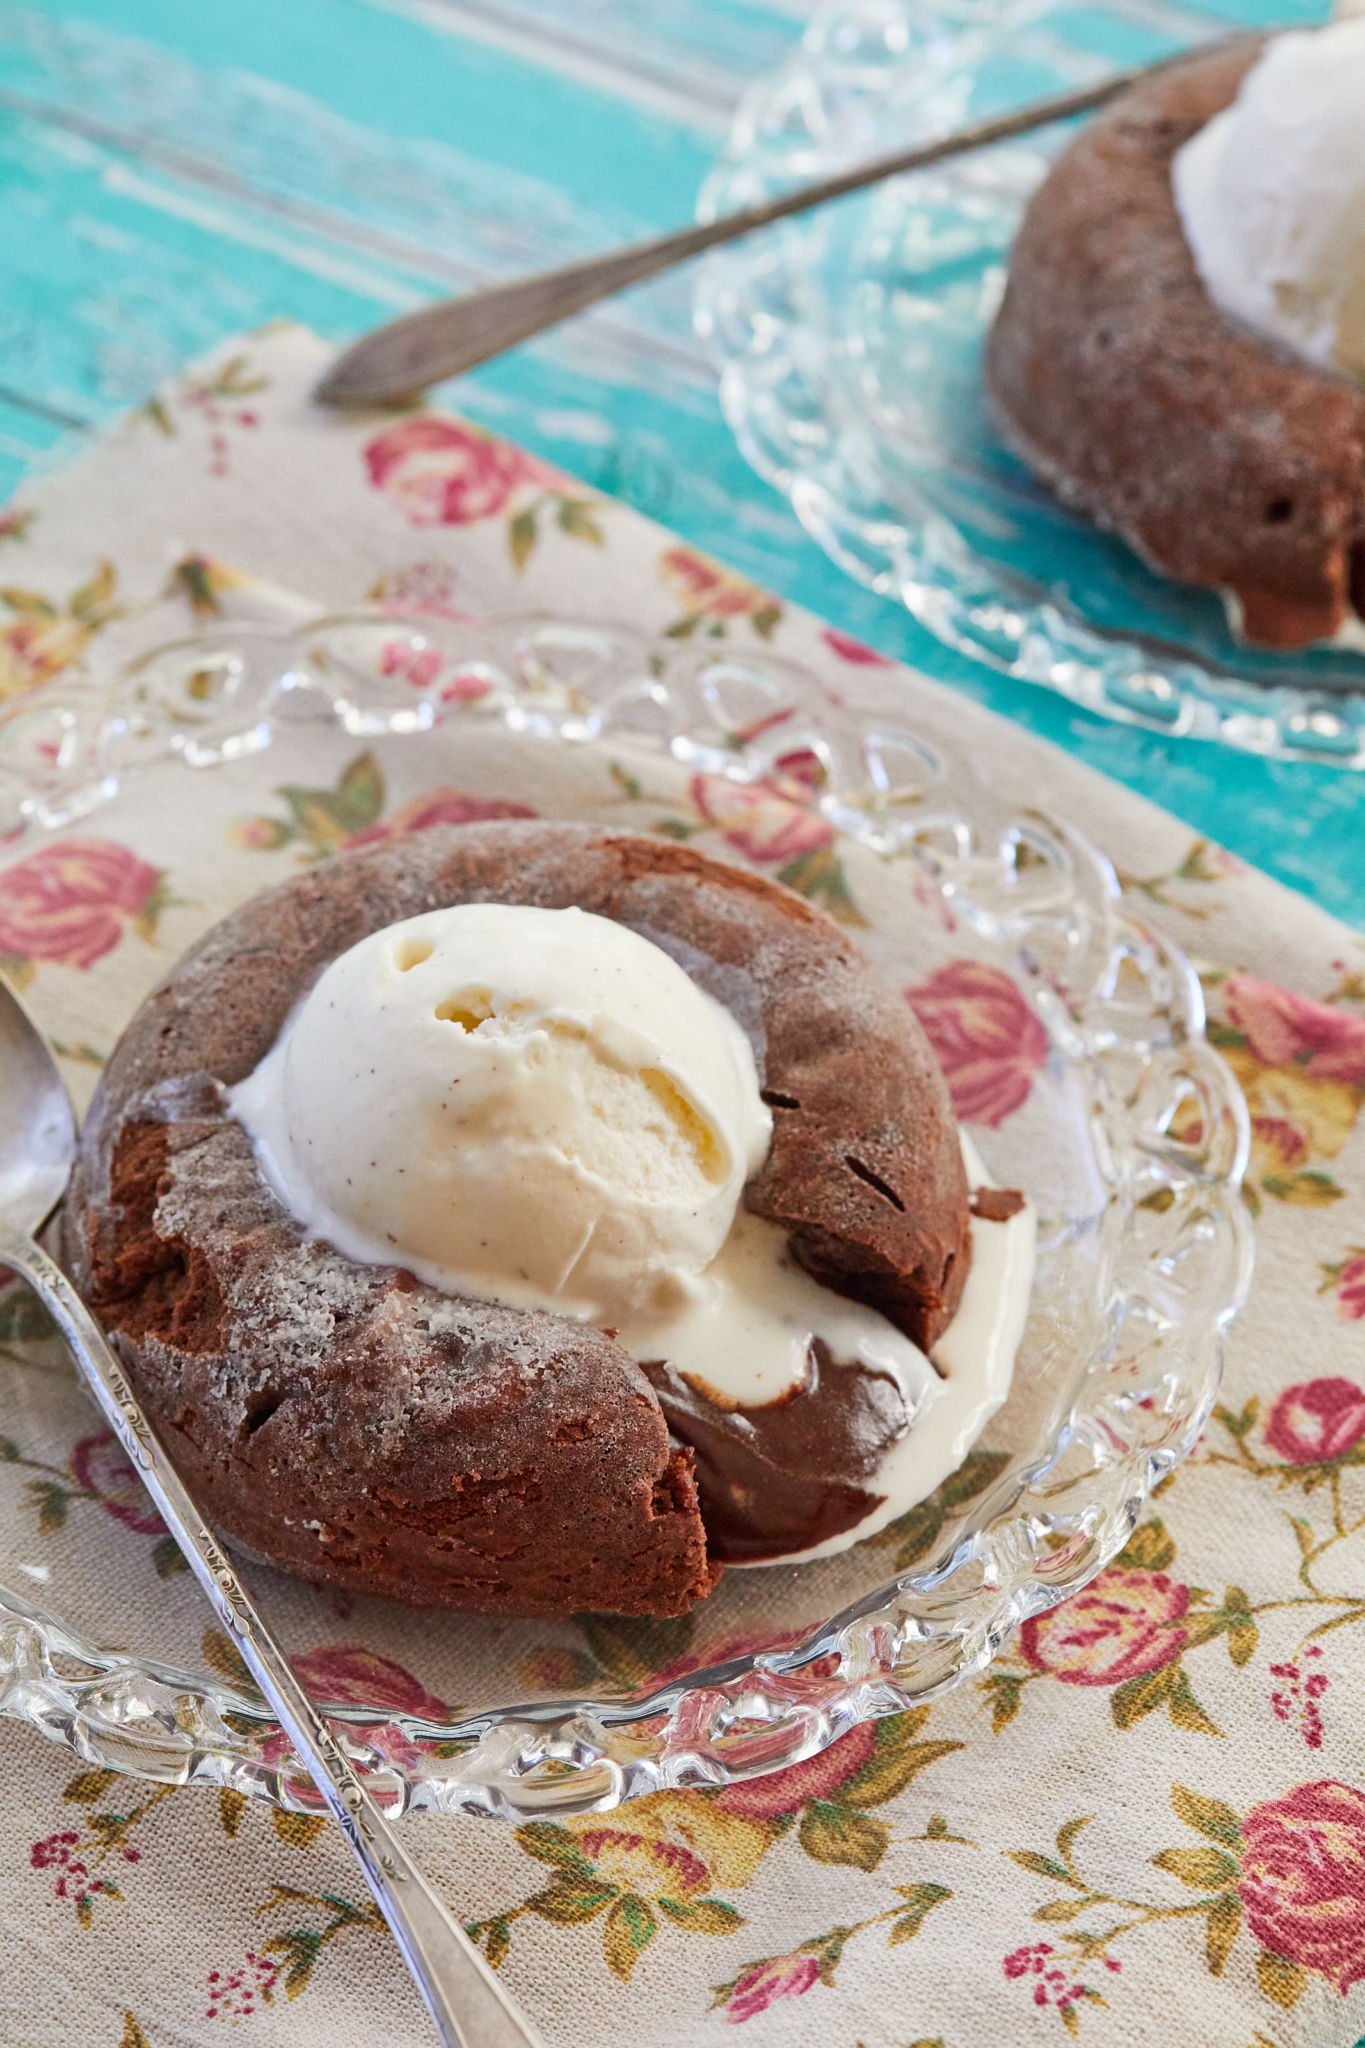 Chocolate Lava Cake for Two with ice cream on top.